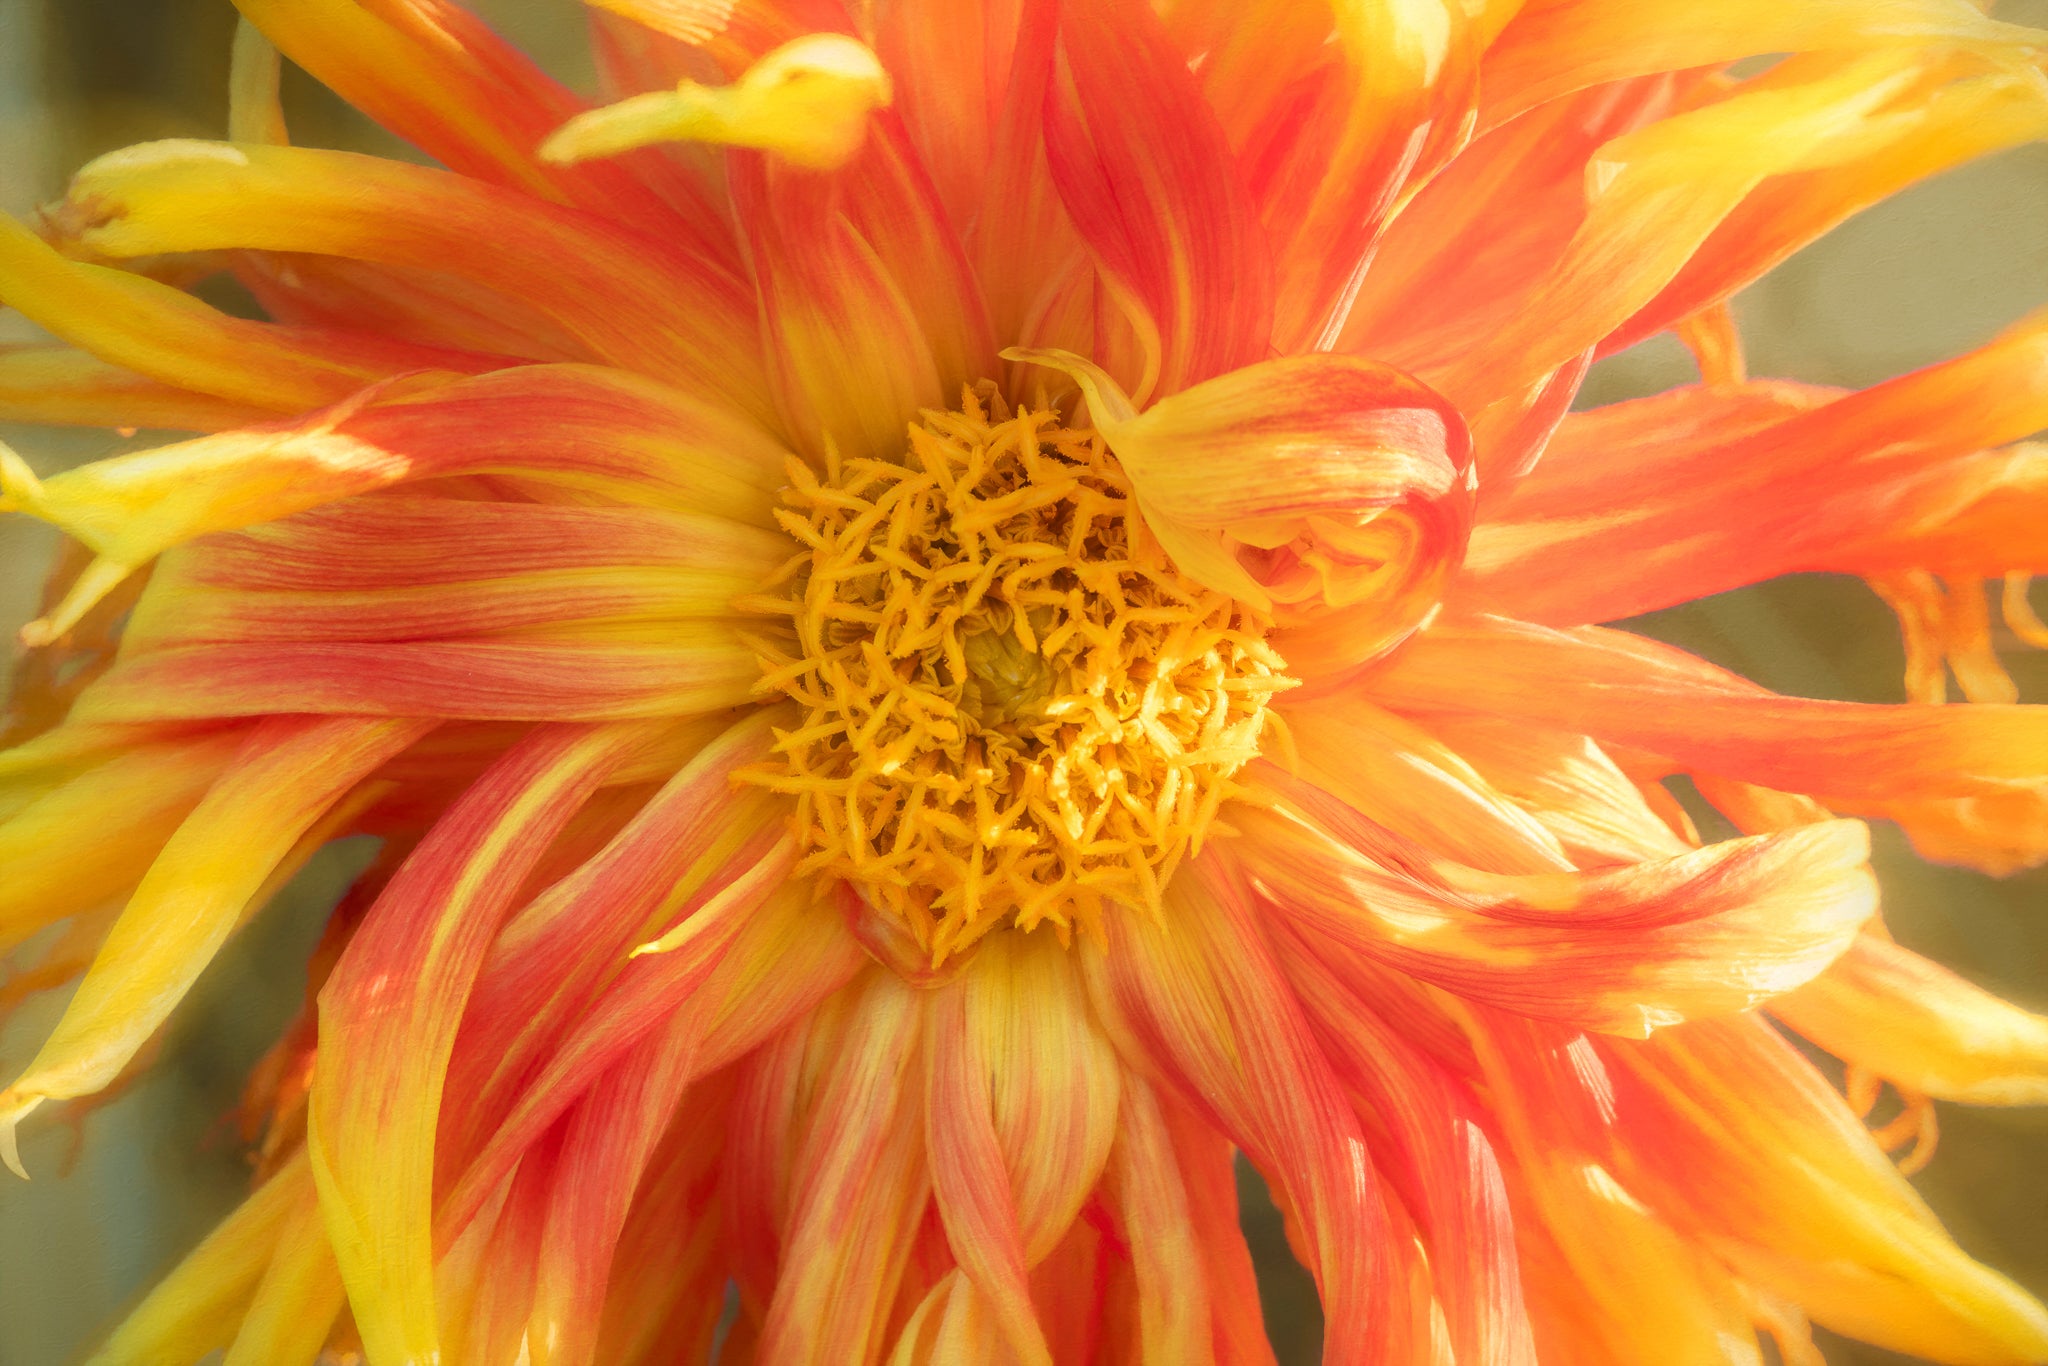 Photograph of flowing yellow dahlia flower by Cameron Dreaux. 